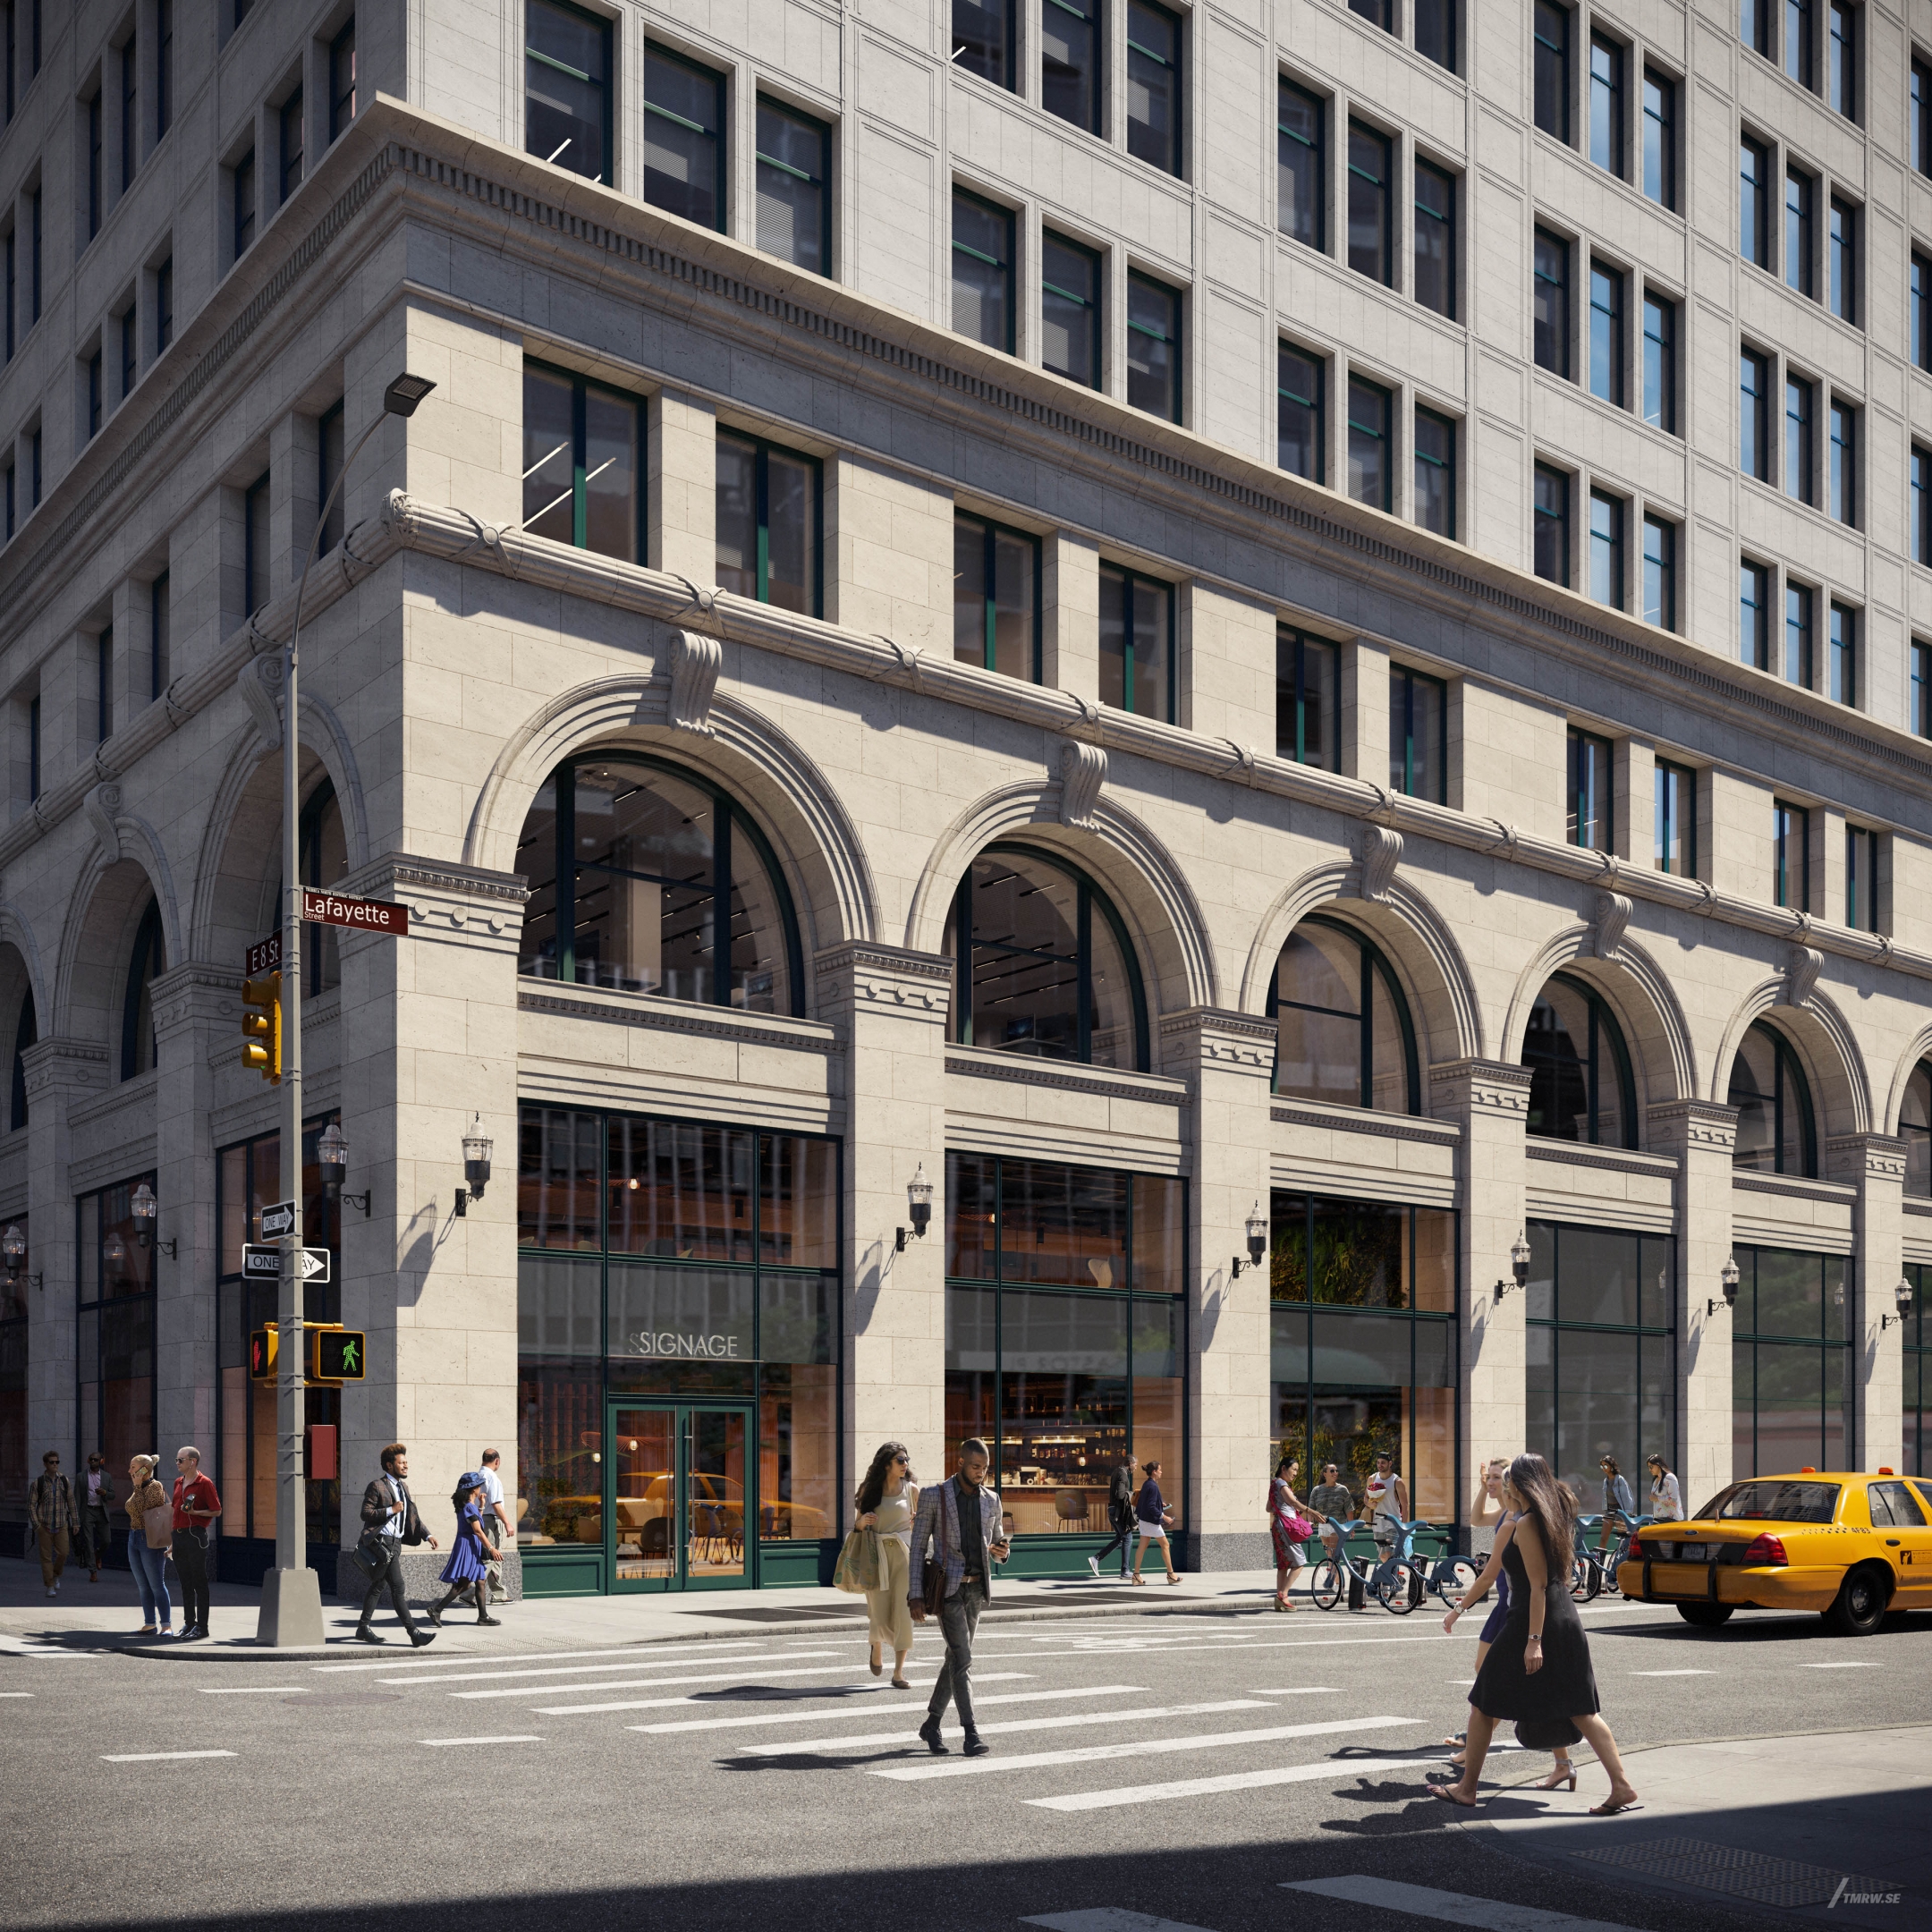 Architectural visualization of 770 Broadway for HOK, an office building during day light from a street view.